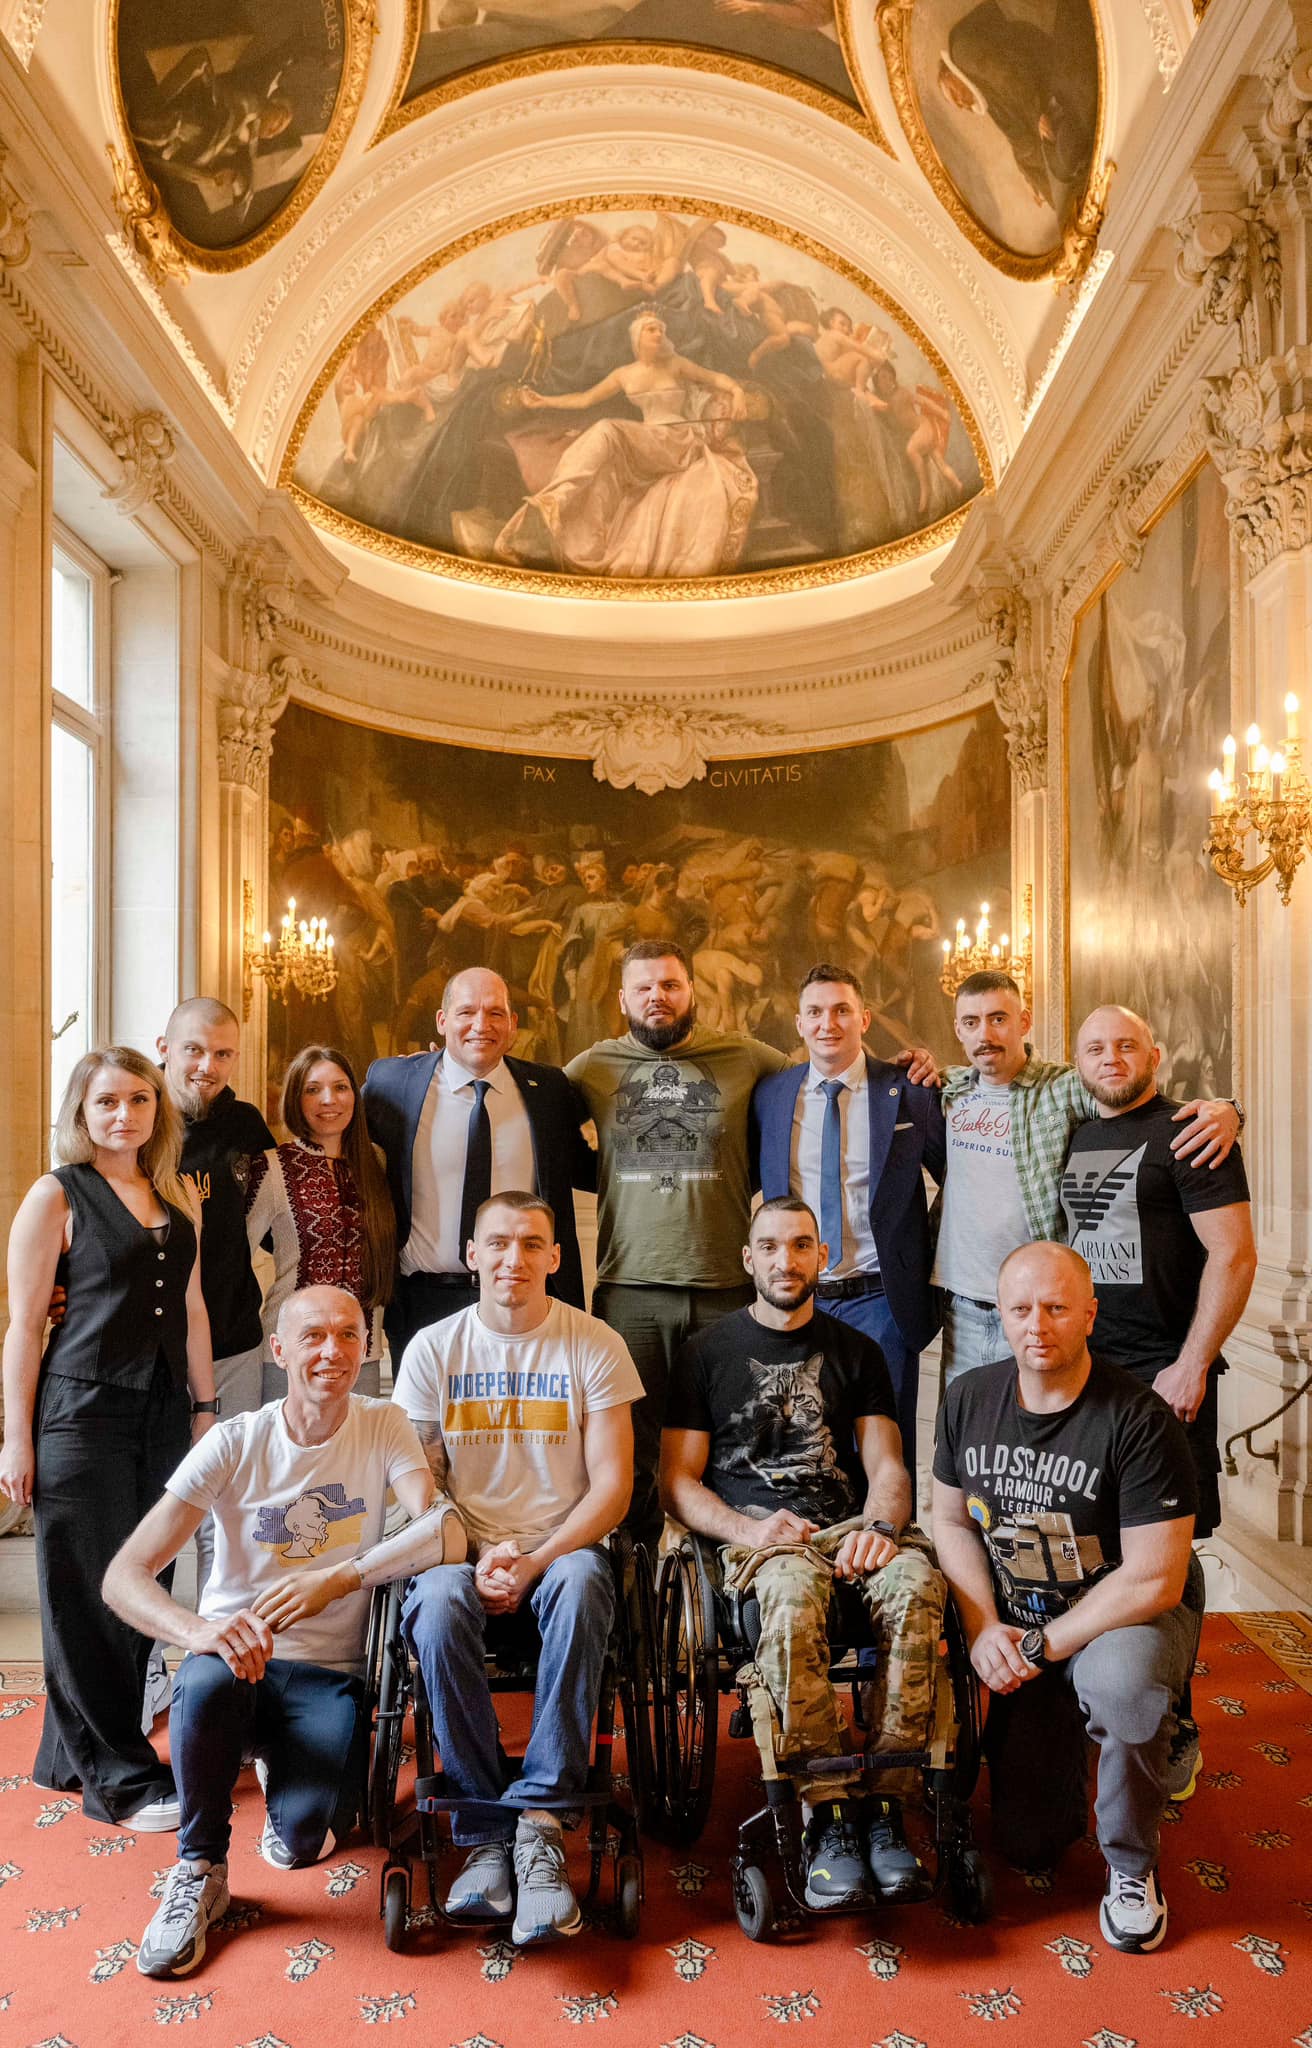 Today was a particularly impactful day, as our veterans had the opportunity to meet with the Mayor of Brussels, Philippe Close